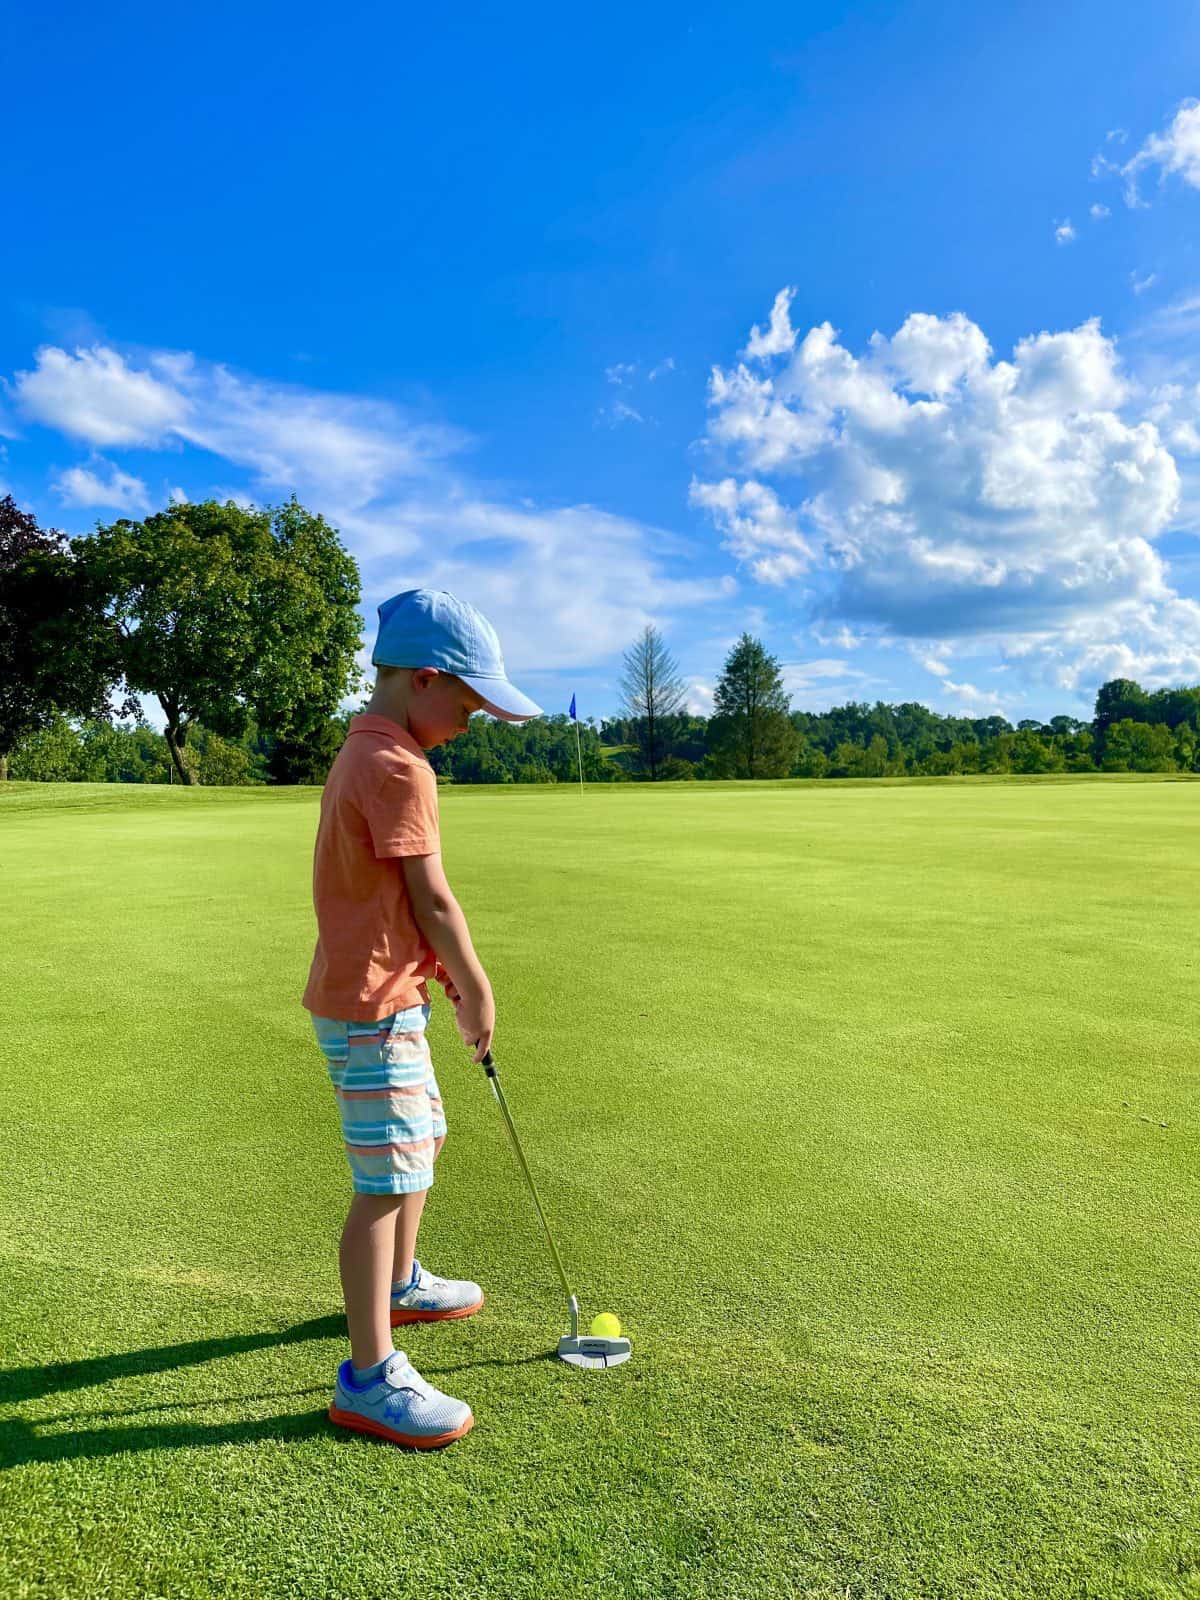 Golf putting with kids - tips for teaching kids how to play golf